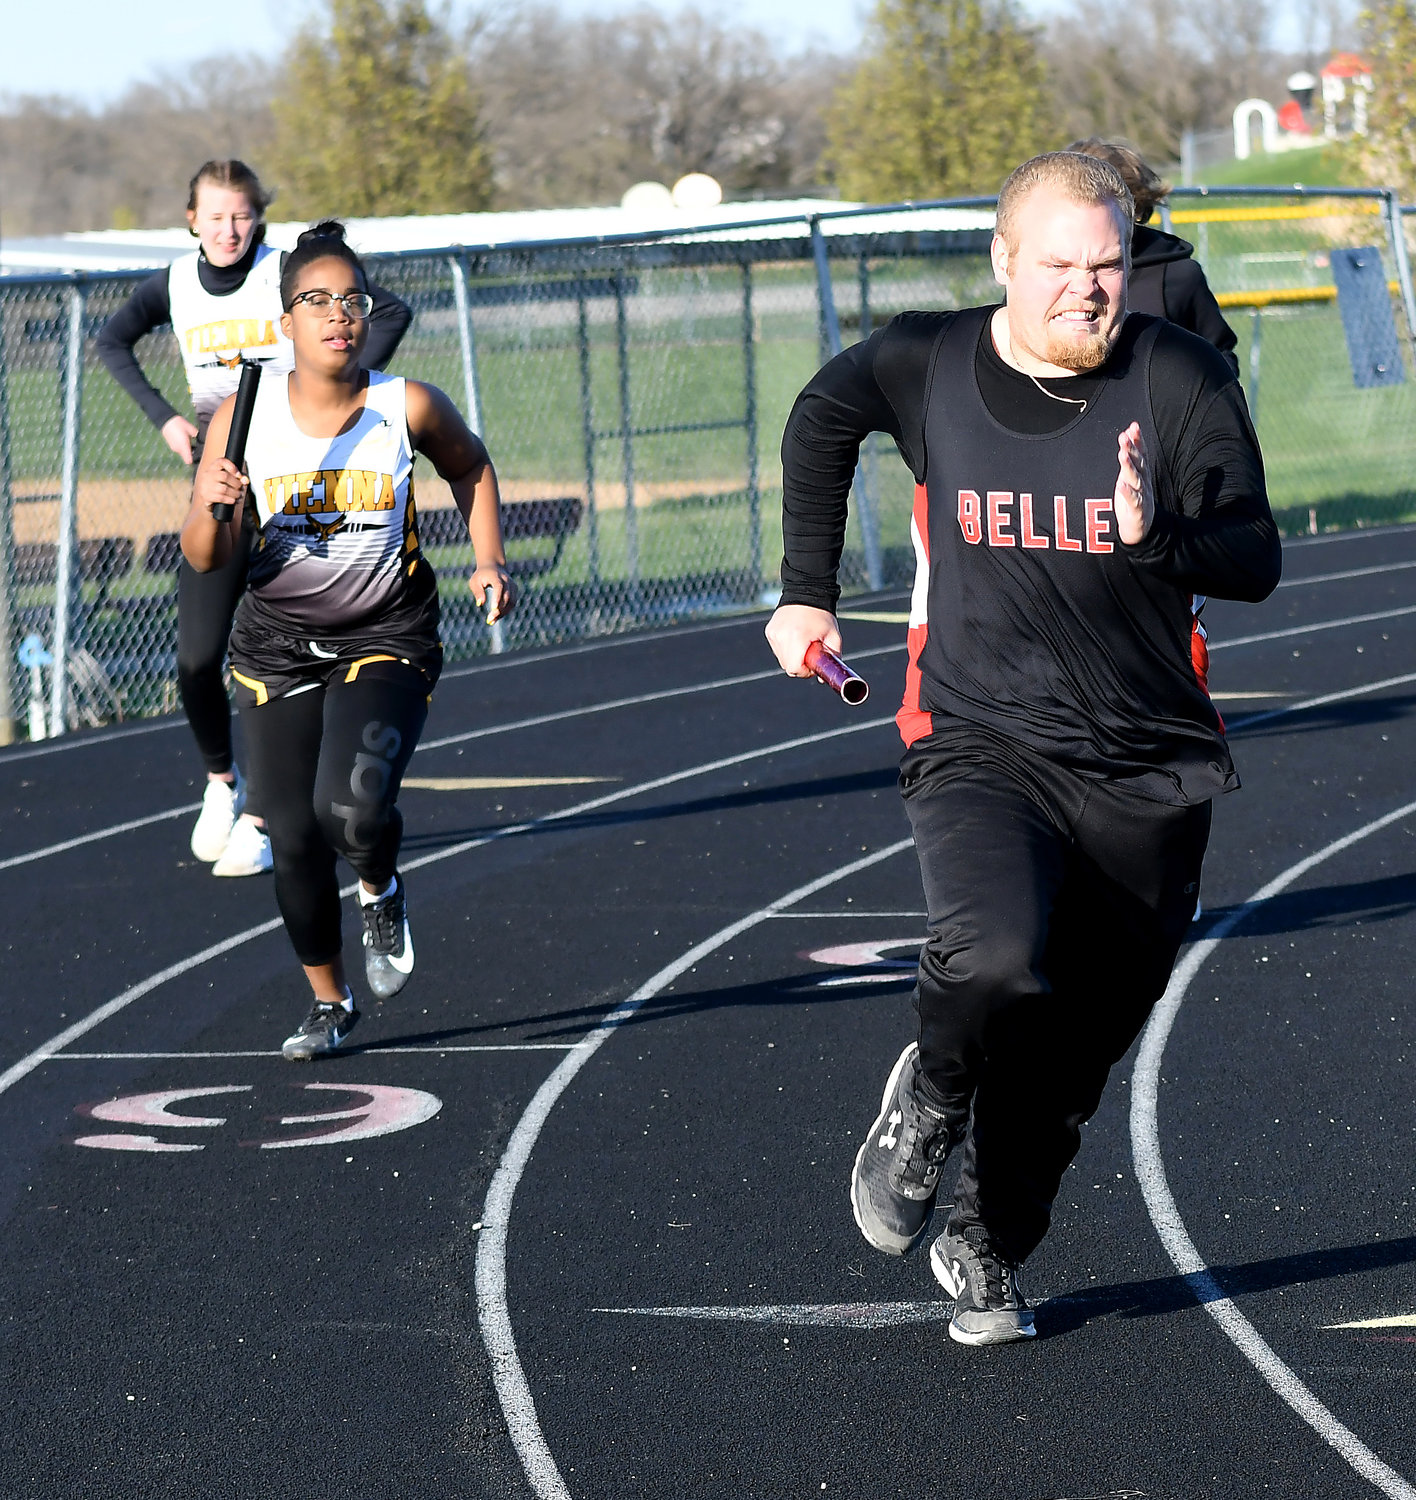 Aliyah Griffin and CJ Drewel (from left) run their legs of the 4x100-meter relay for Vienna and Belle respectively.